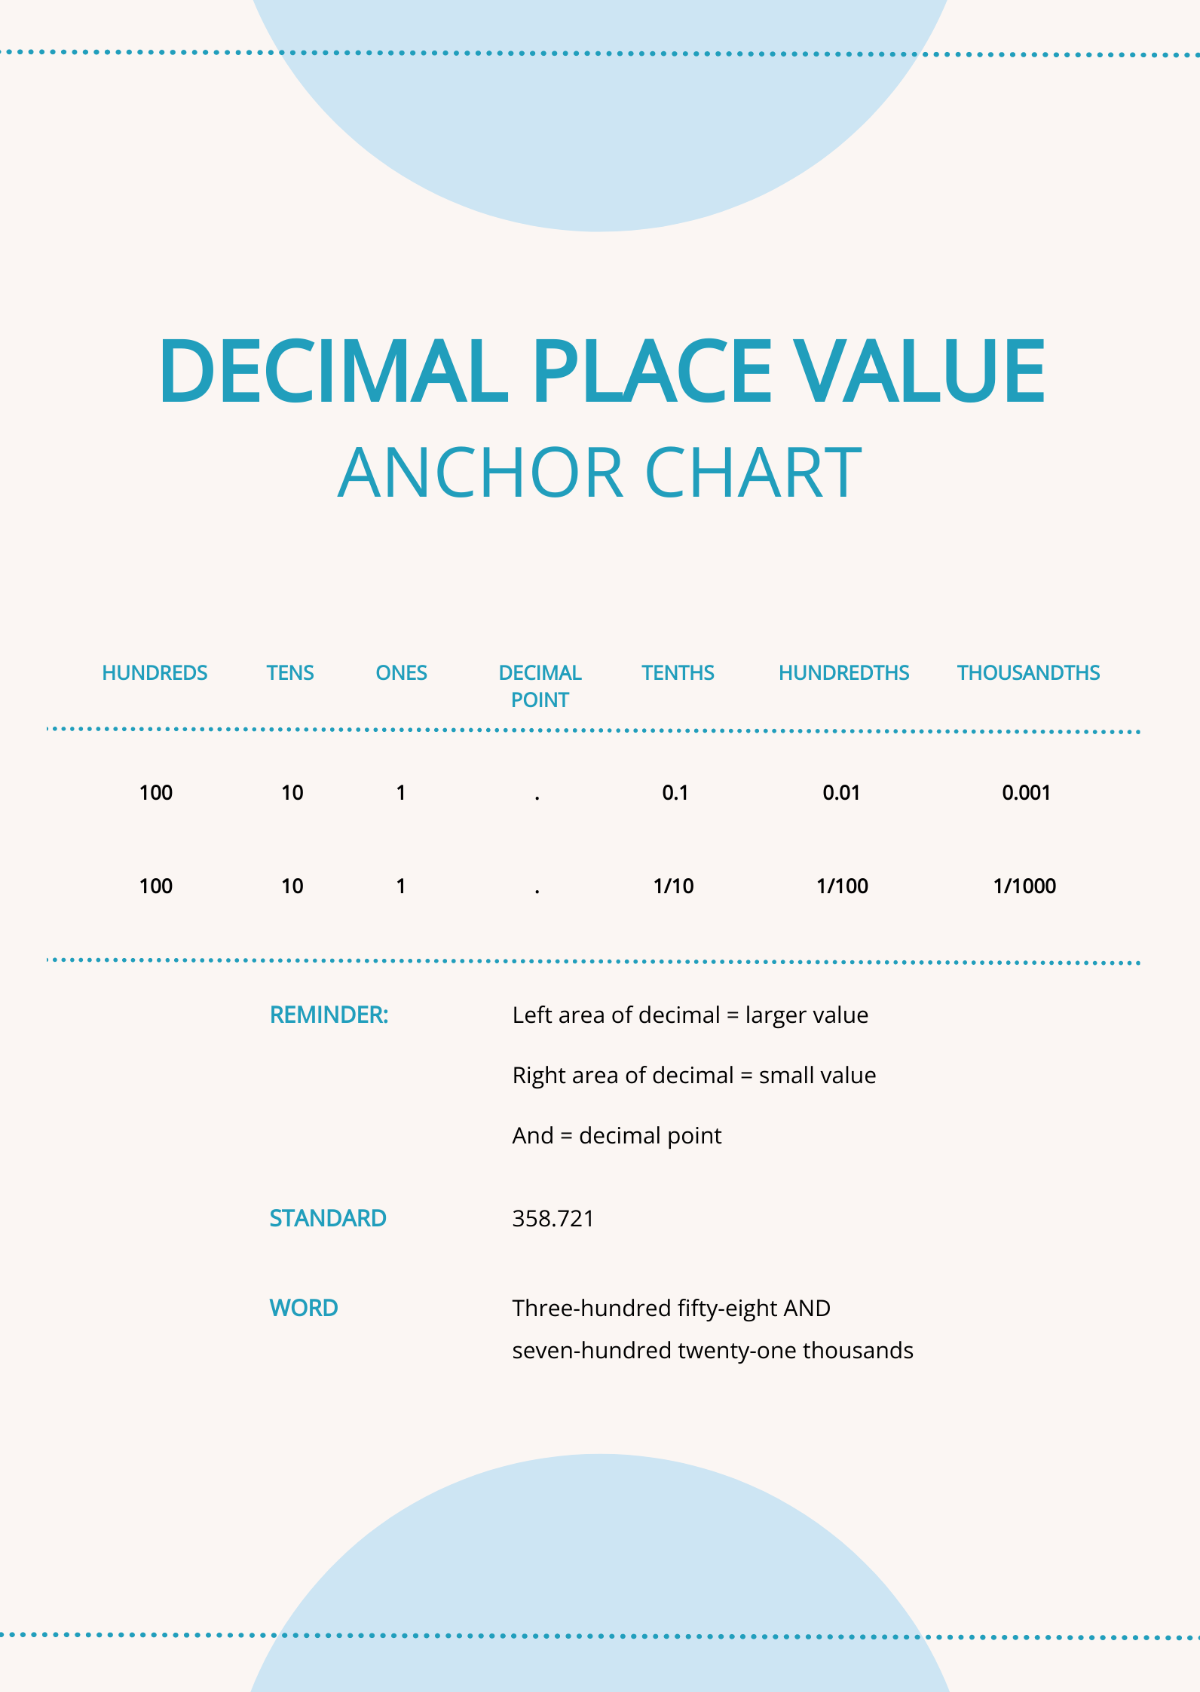 Decimal Place Value Anchor Chart Template